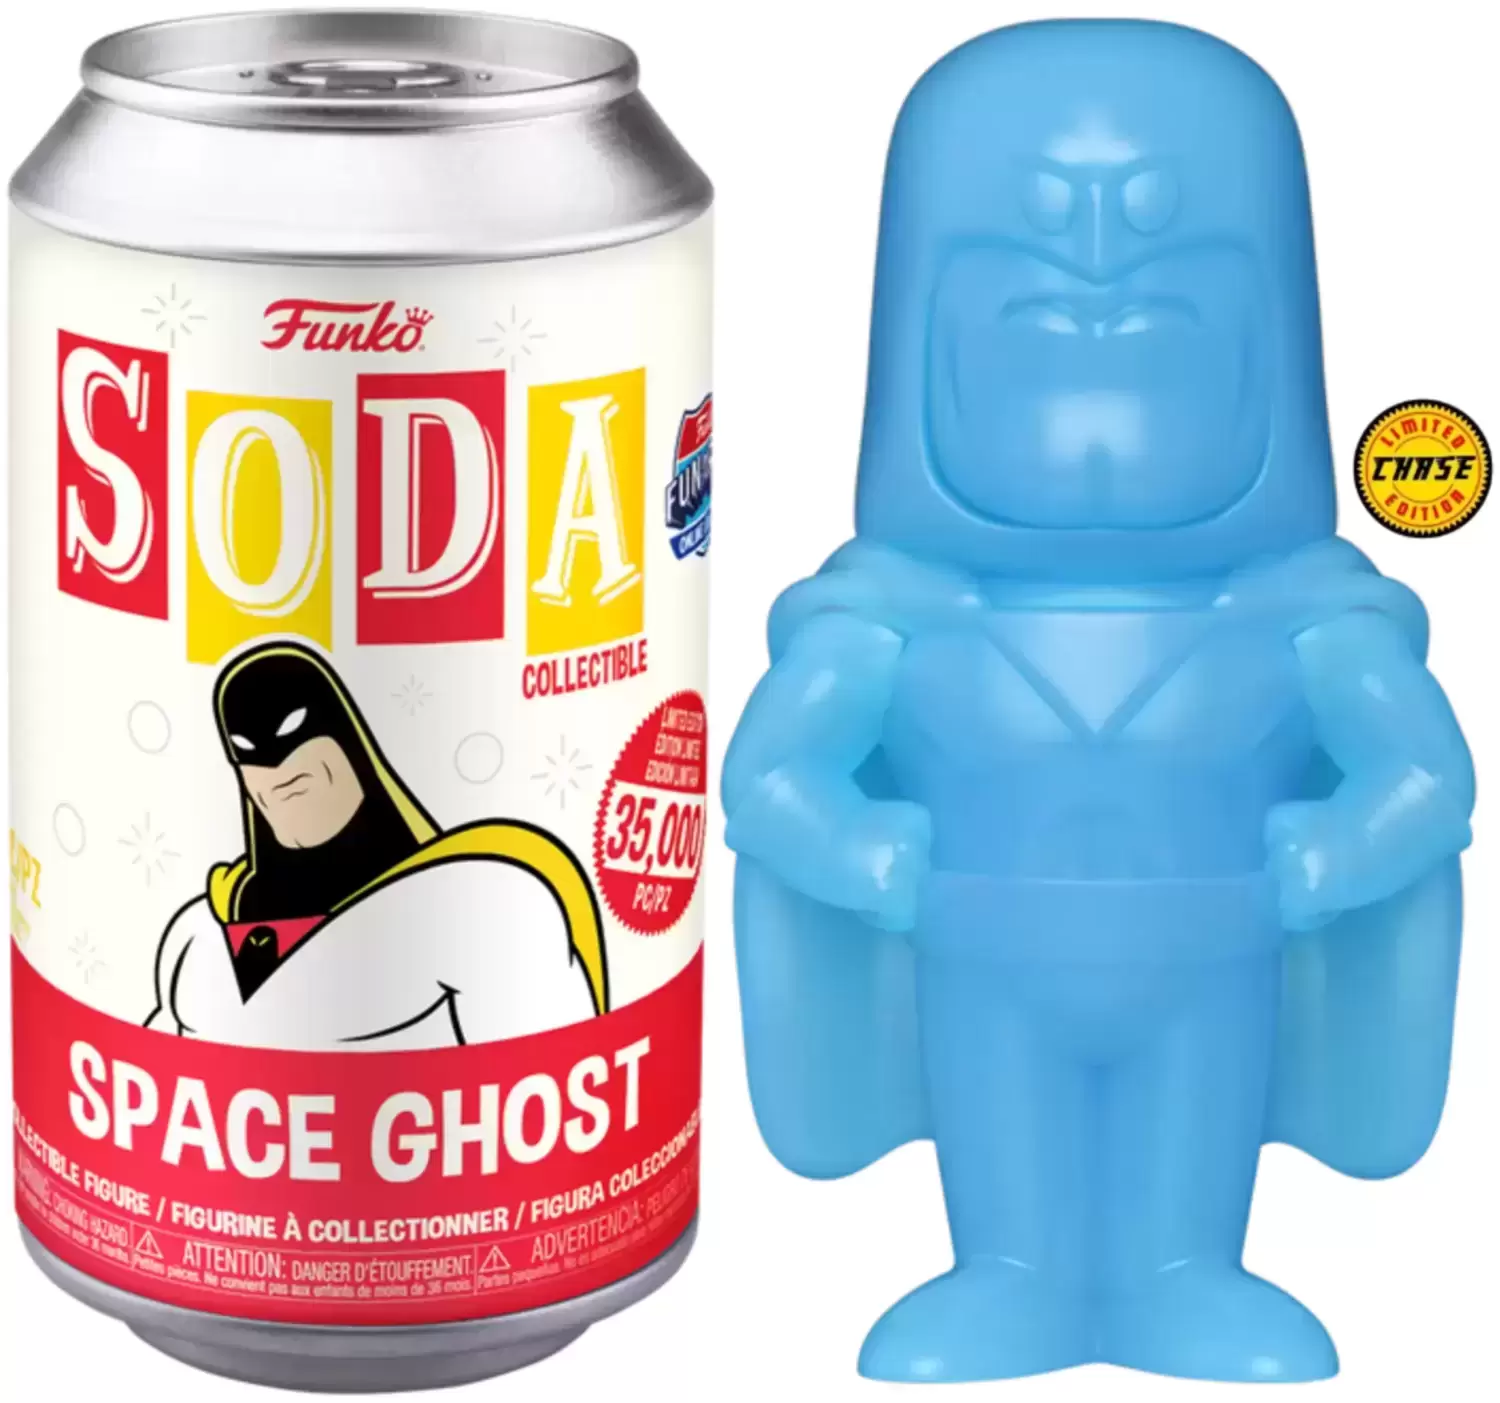 Vinyl Soda! - Space Ghost Chase